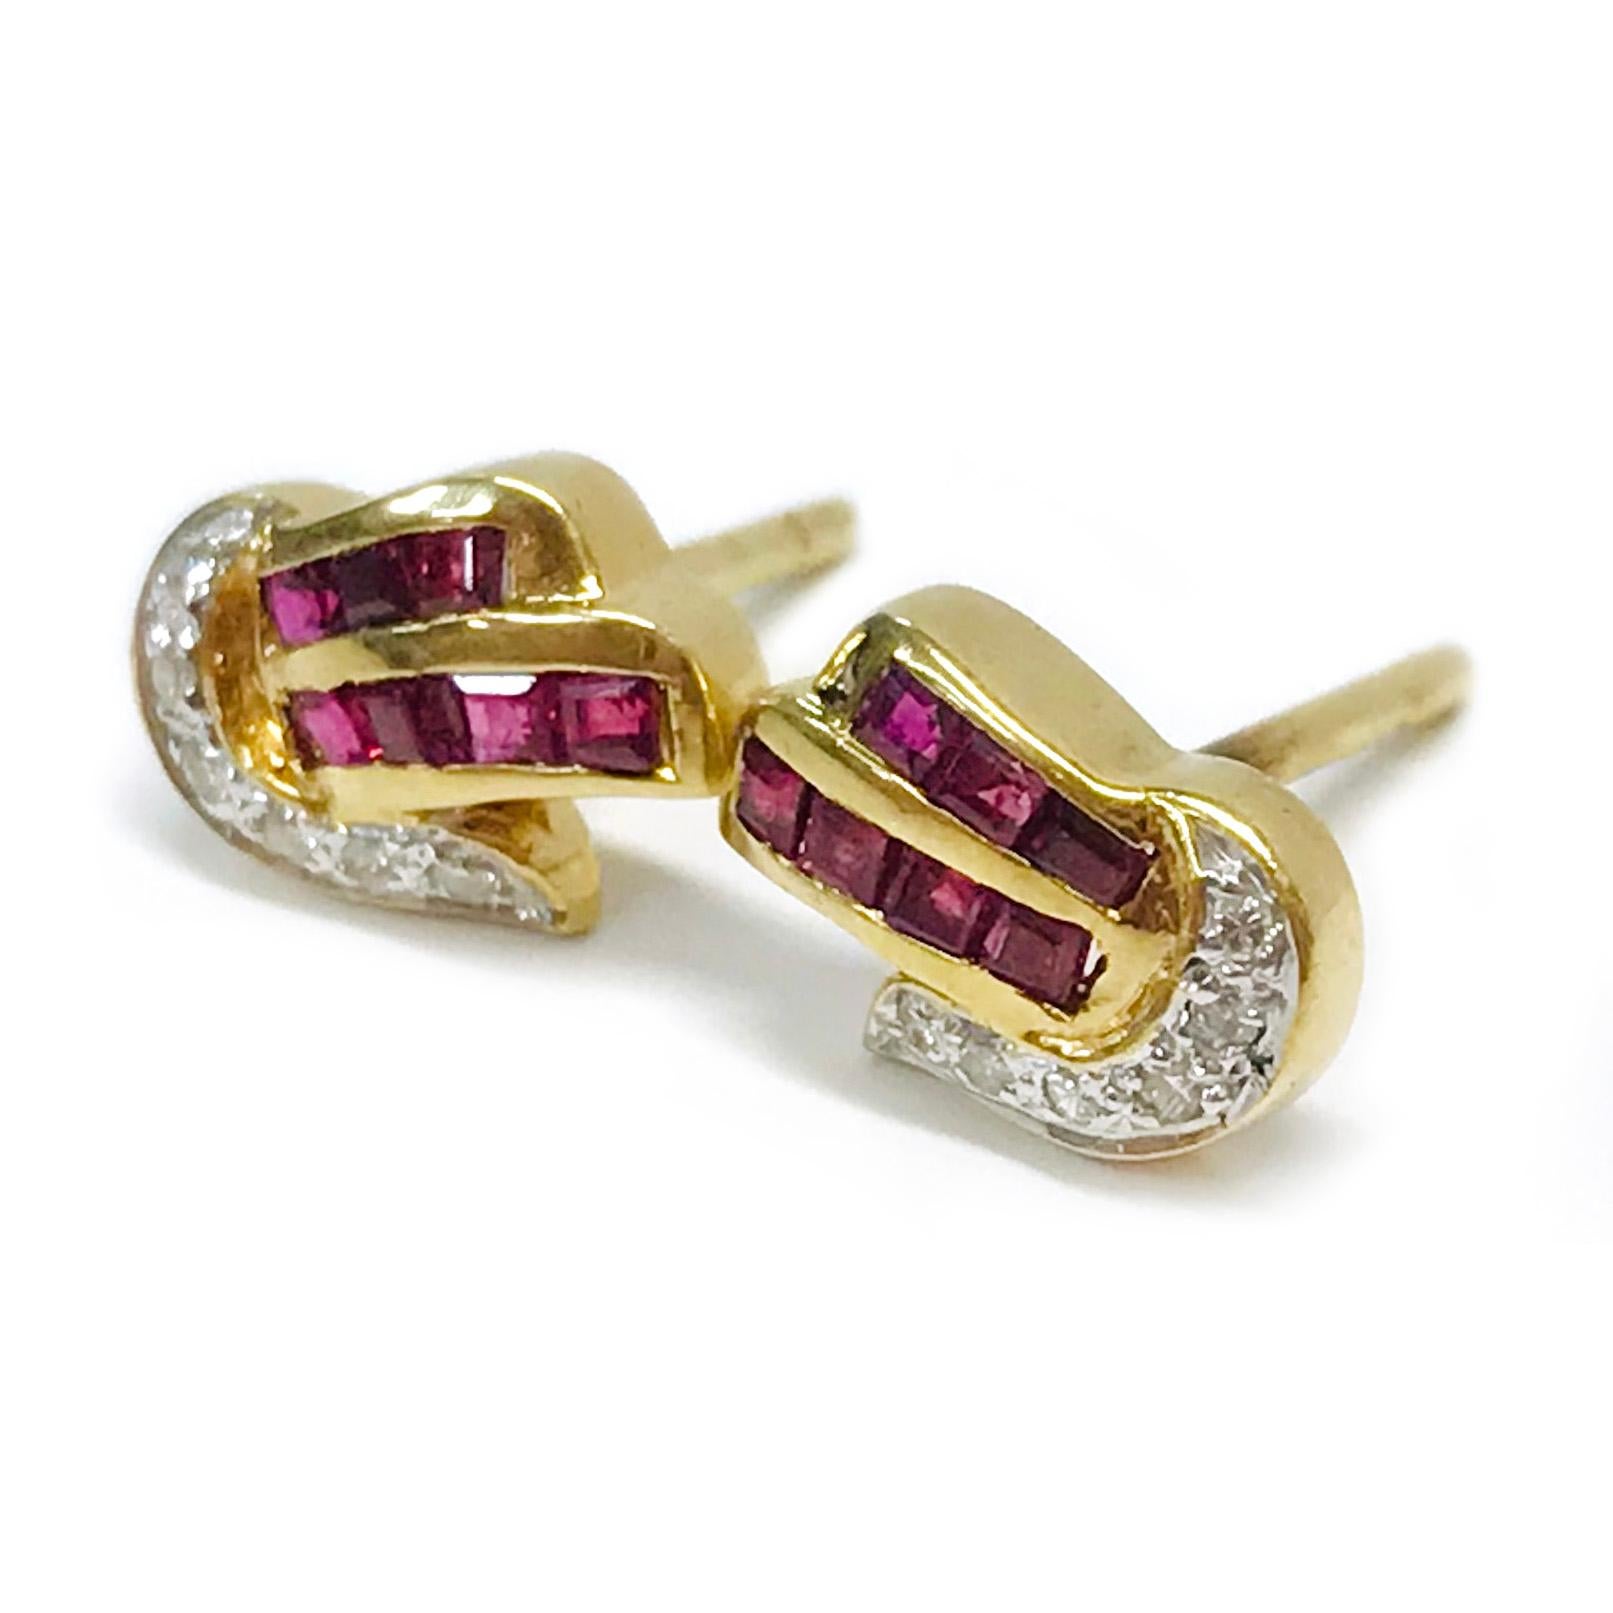 18 Karat Yellow Gold Ruby Diamond Stud Earrings. Each earring features seven princess-cut Rubies channel-set in two rows and six round melee diamonds pave-set in white gold. These petite yet striking earrings have a post and push back. The pair of